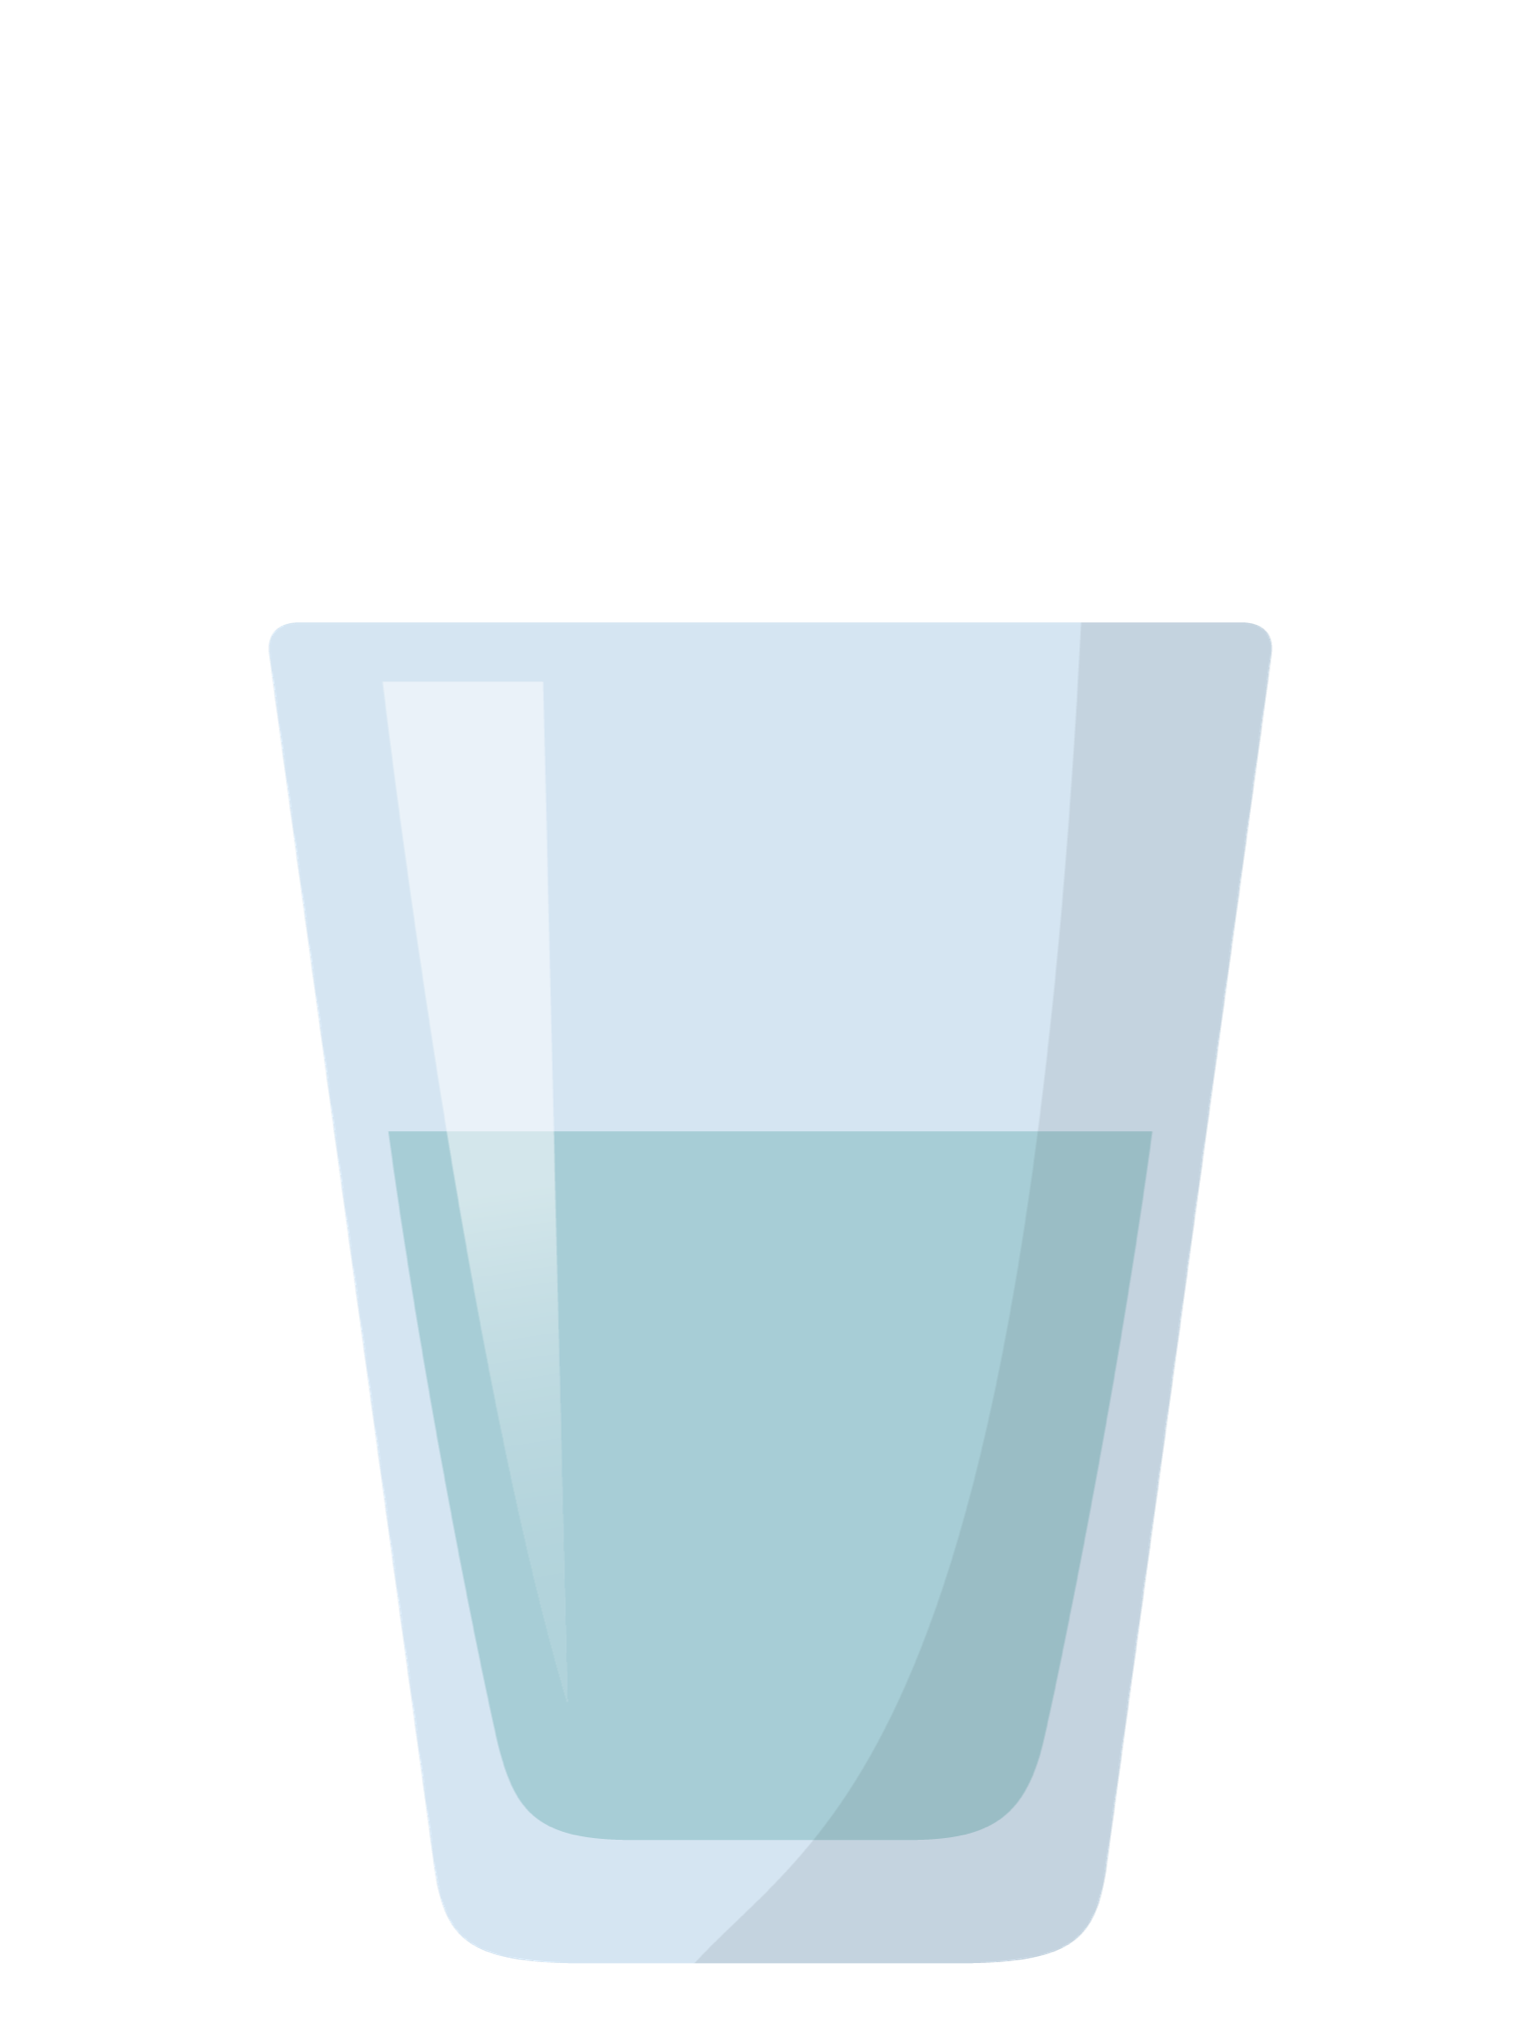 A cartoon drawing of a glass of water which is smelly